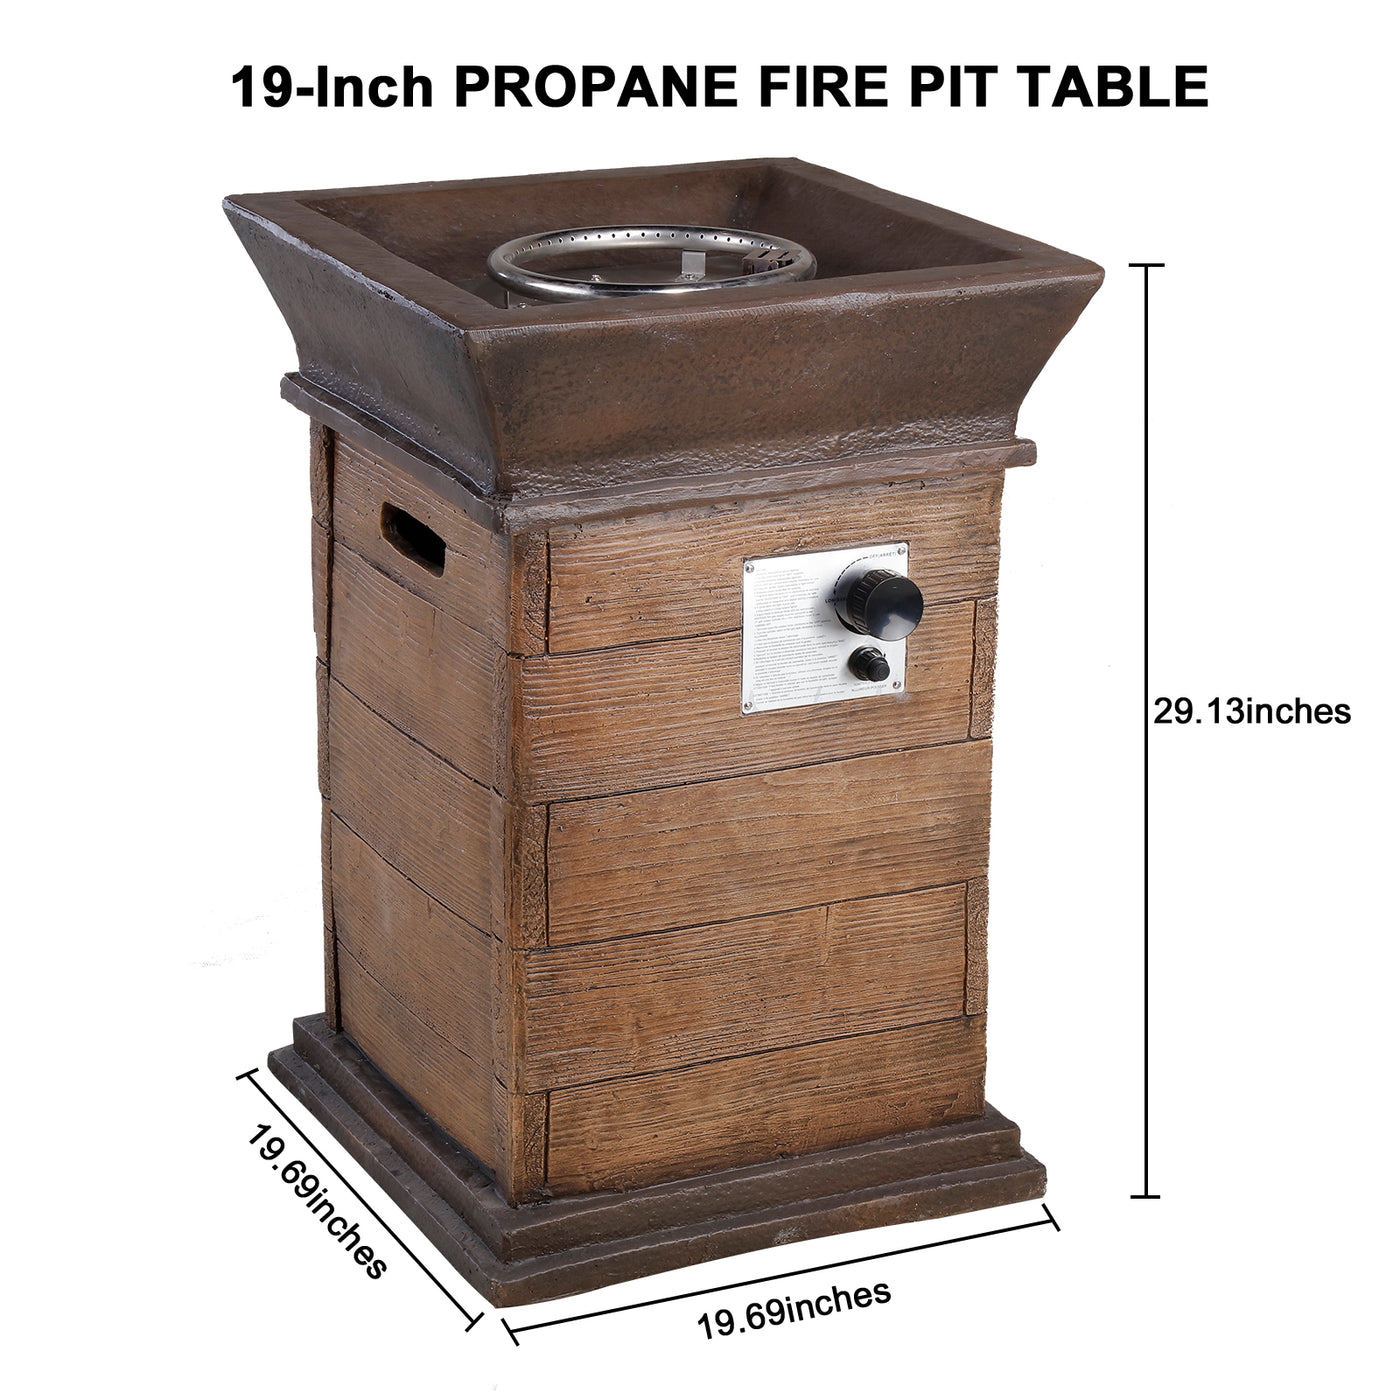 19" Outdoor Propane Fire Pit Table, Realistic Faux Wood Finish Patio Fireplace